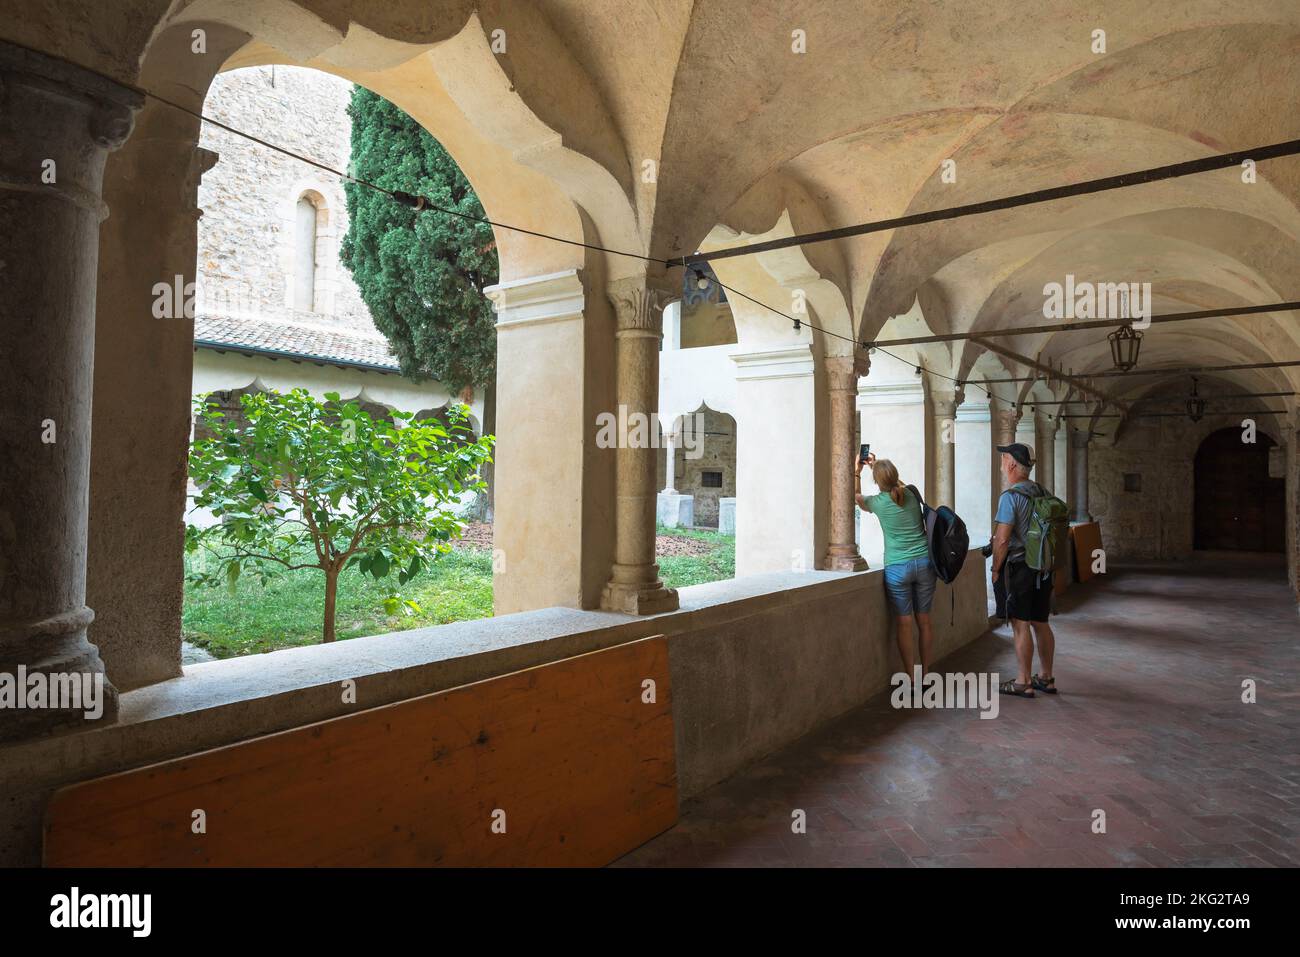 San Francesco Monastery Gargnano, view of people exploring the scenic cloisters of the San Francesco Monastery in Gargnano, Lake Garda, Italy Stock Photo